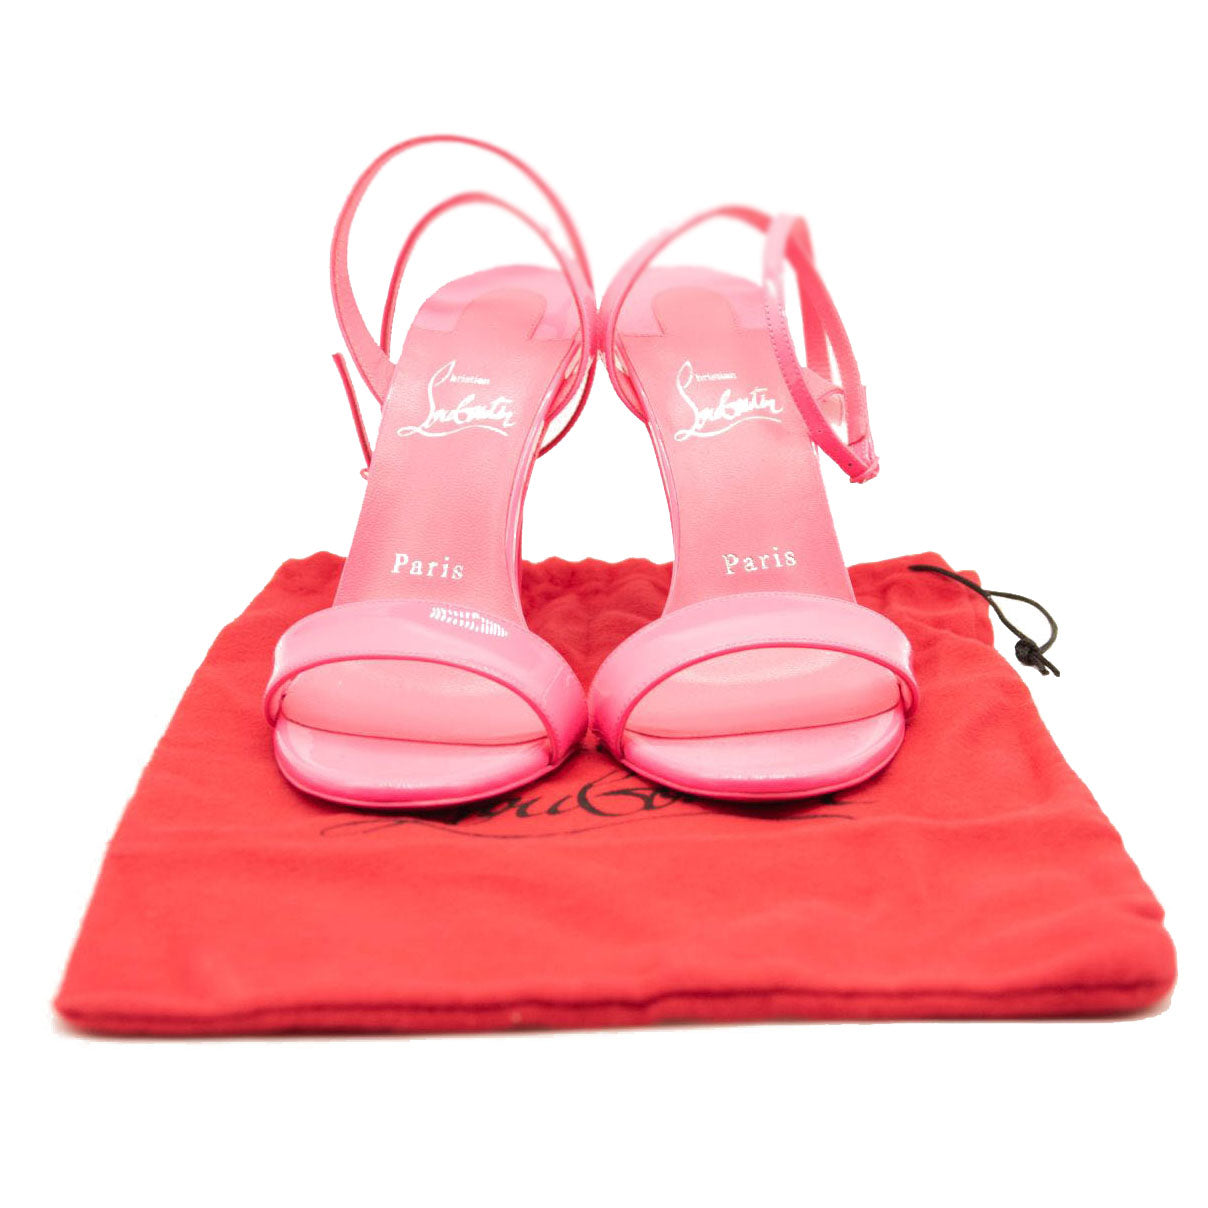 NEW Christian Louboutin Loubigirl 100 Sandals In Rose-pink Patent Leather